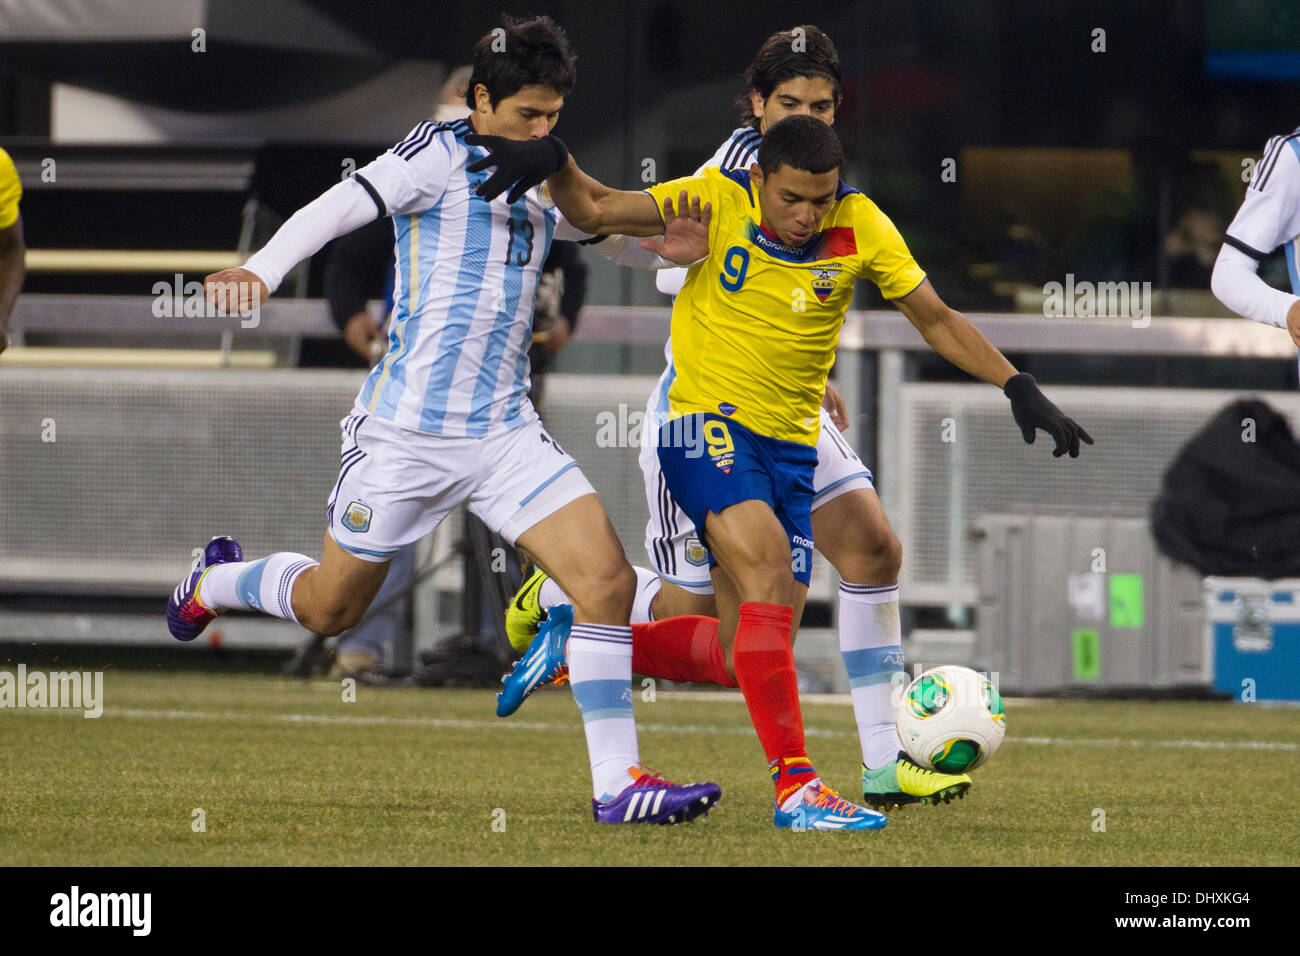 a tie, 0-0, . 15th Nov, 2013. Ecuador midfielder Jefferson Montero (9) drives up the field with the ball as he is flanked by Argentina defender Facundo Roncaglia (13) and midfielder Ever Banega (19) during the Gillette International Soccer series game between Argentina and Ecuador at the MetLife Stadium in East Rutherford, New Jersey. The match ends in a tie, 0-0. (Christopher Szagola/Cal Sport Media) © csm/Alamy Live News Stock Photo